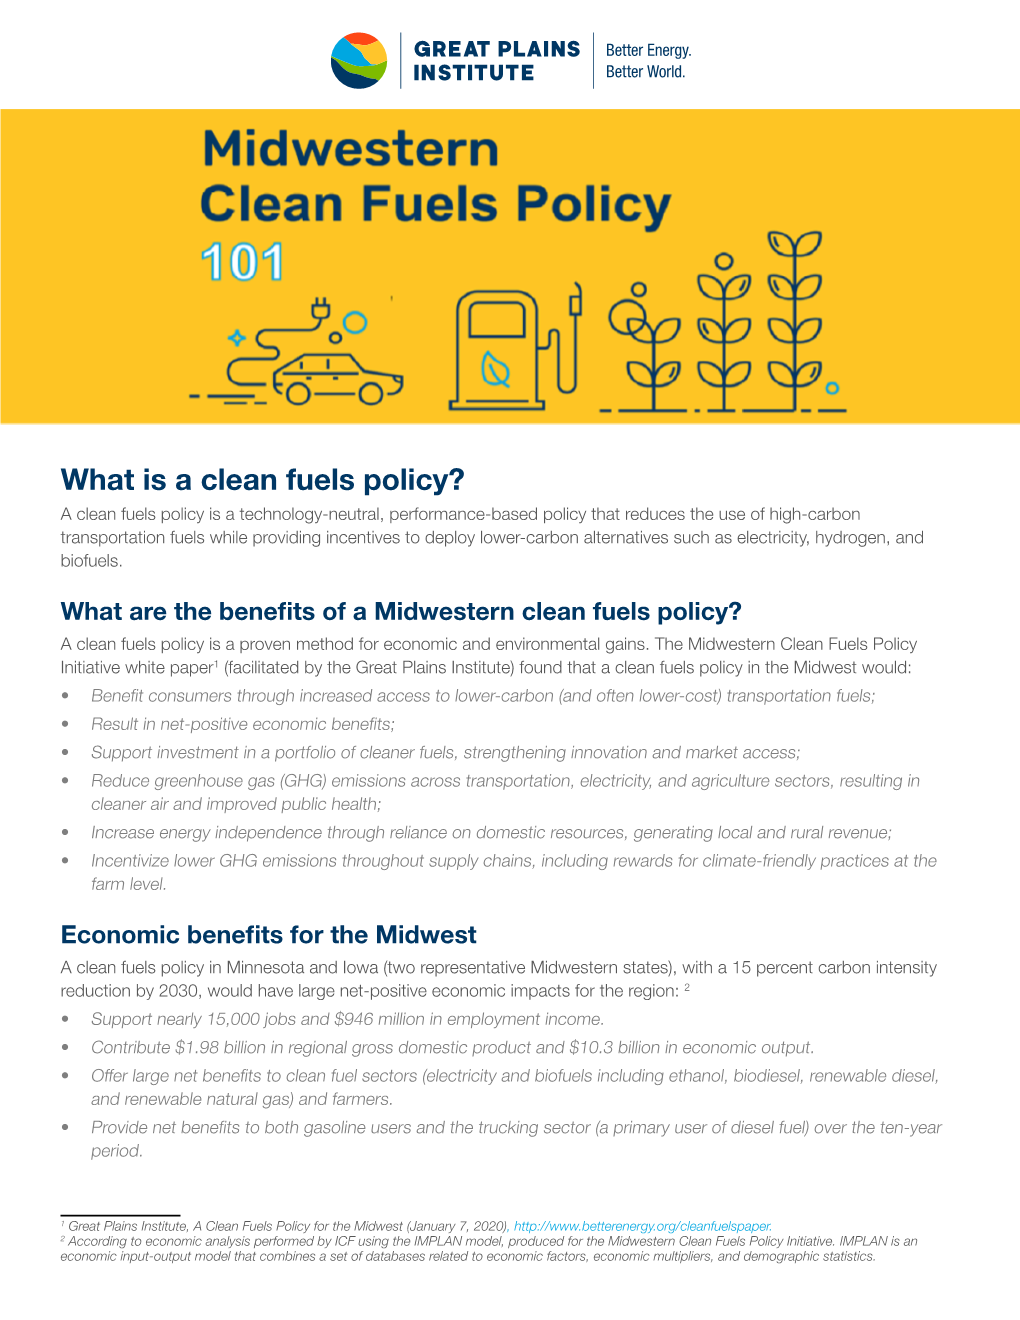 What Is a Clean Fuels Policy?